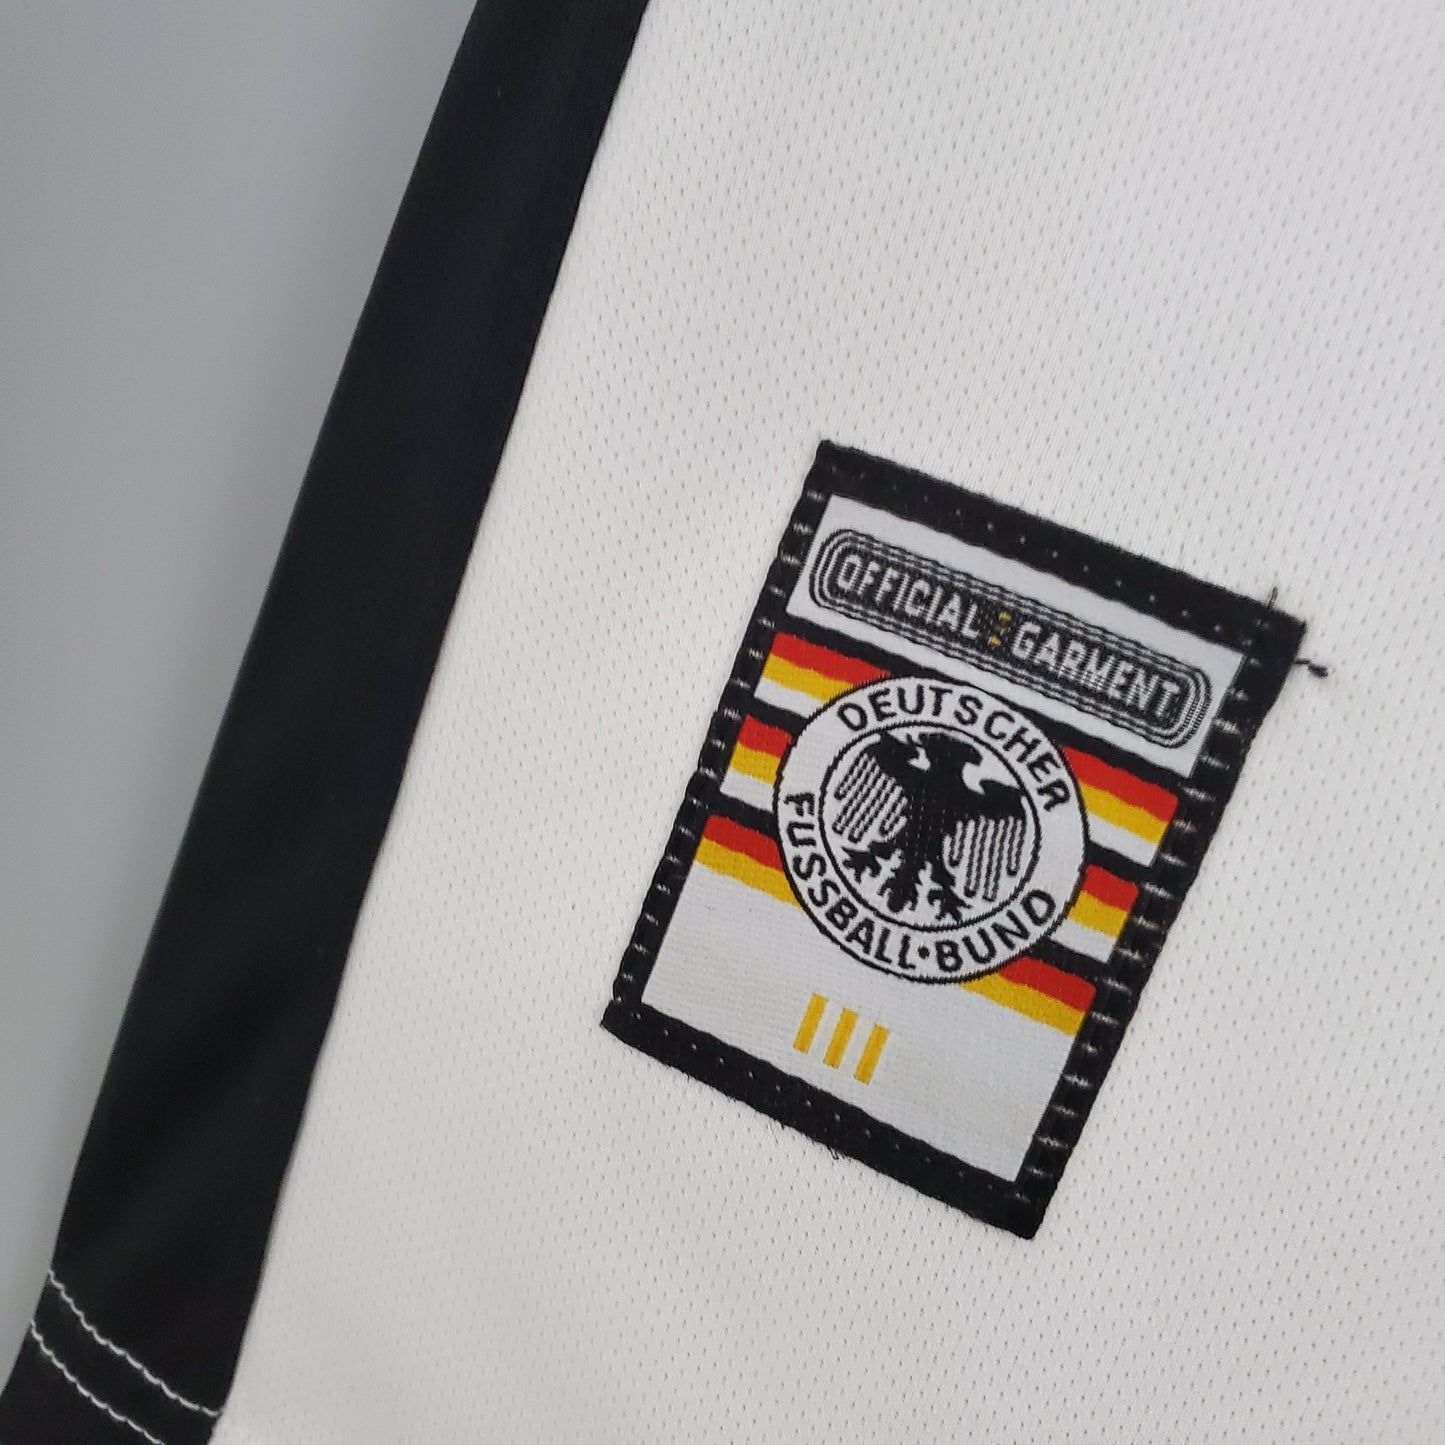 Germany 1998 Home Jersey